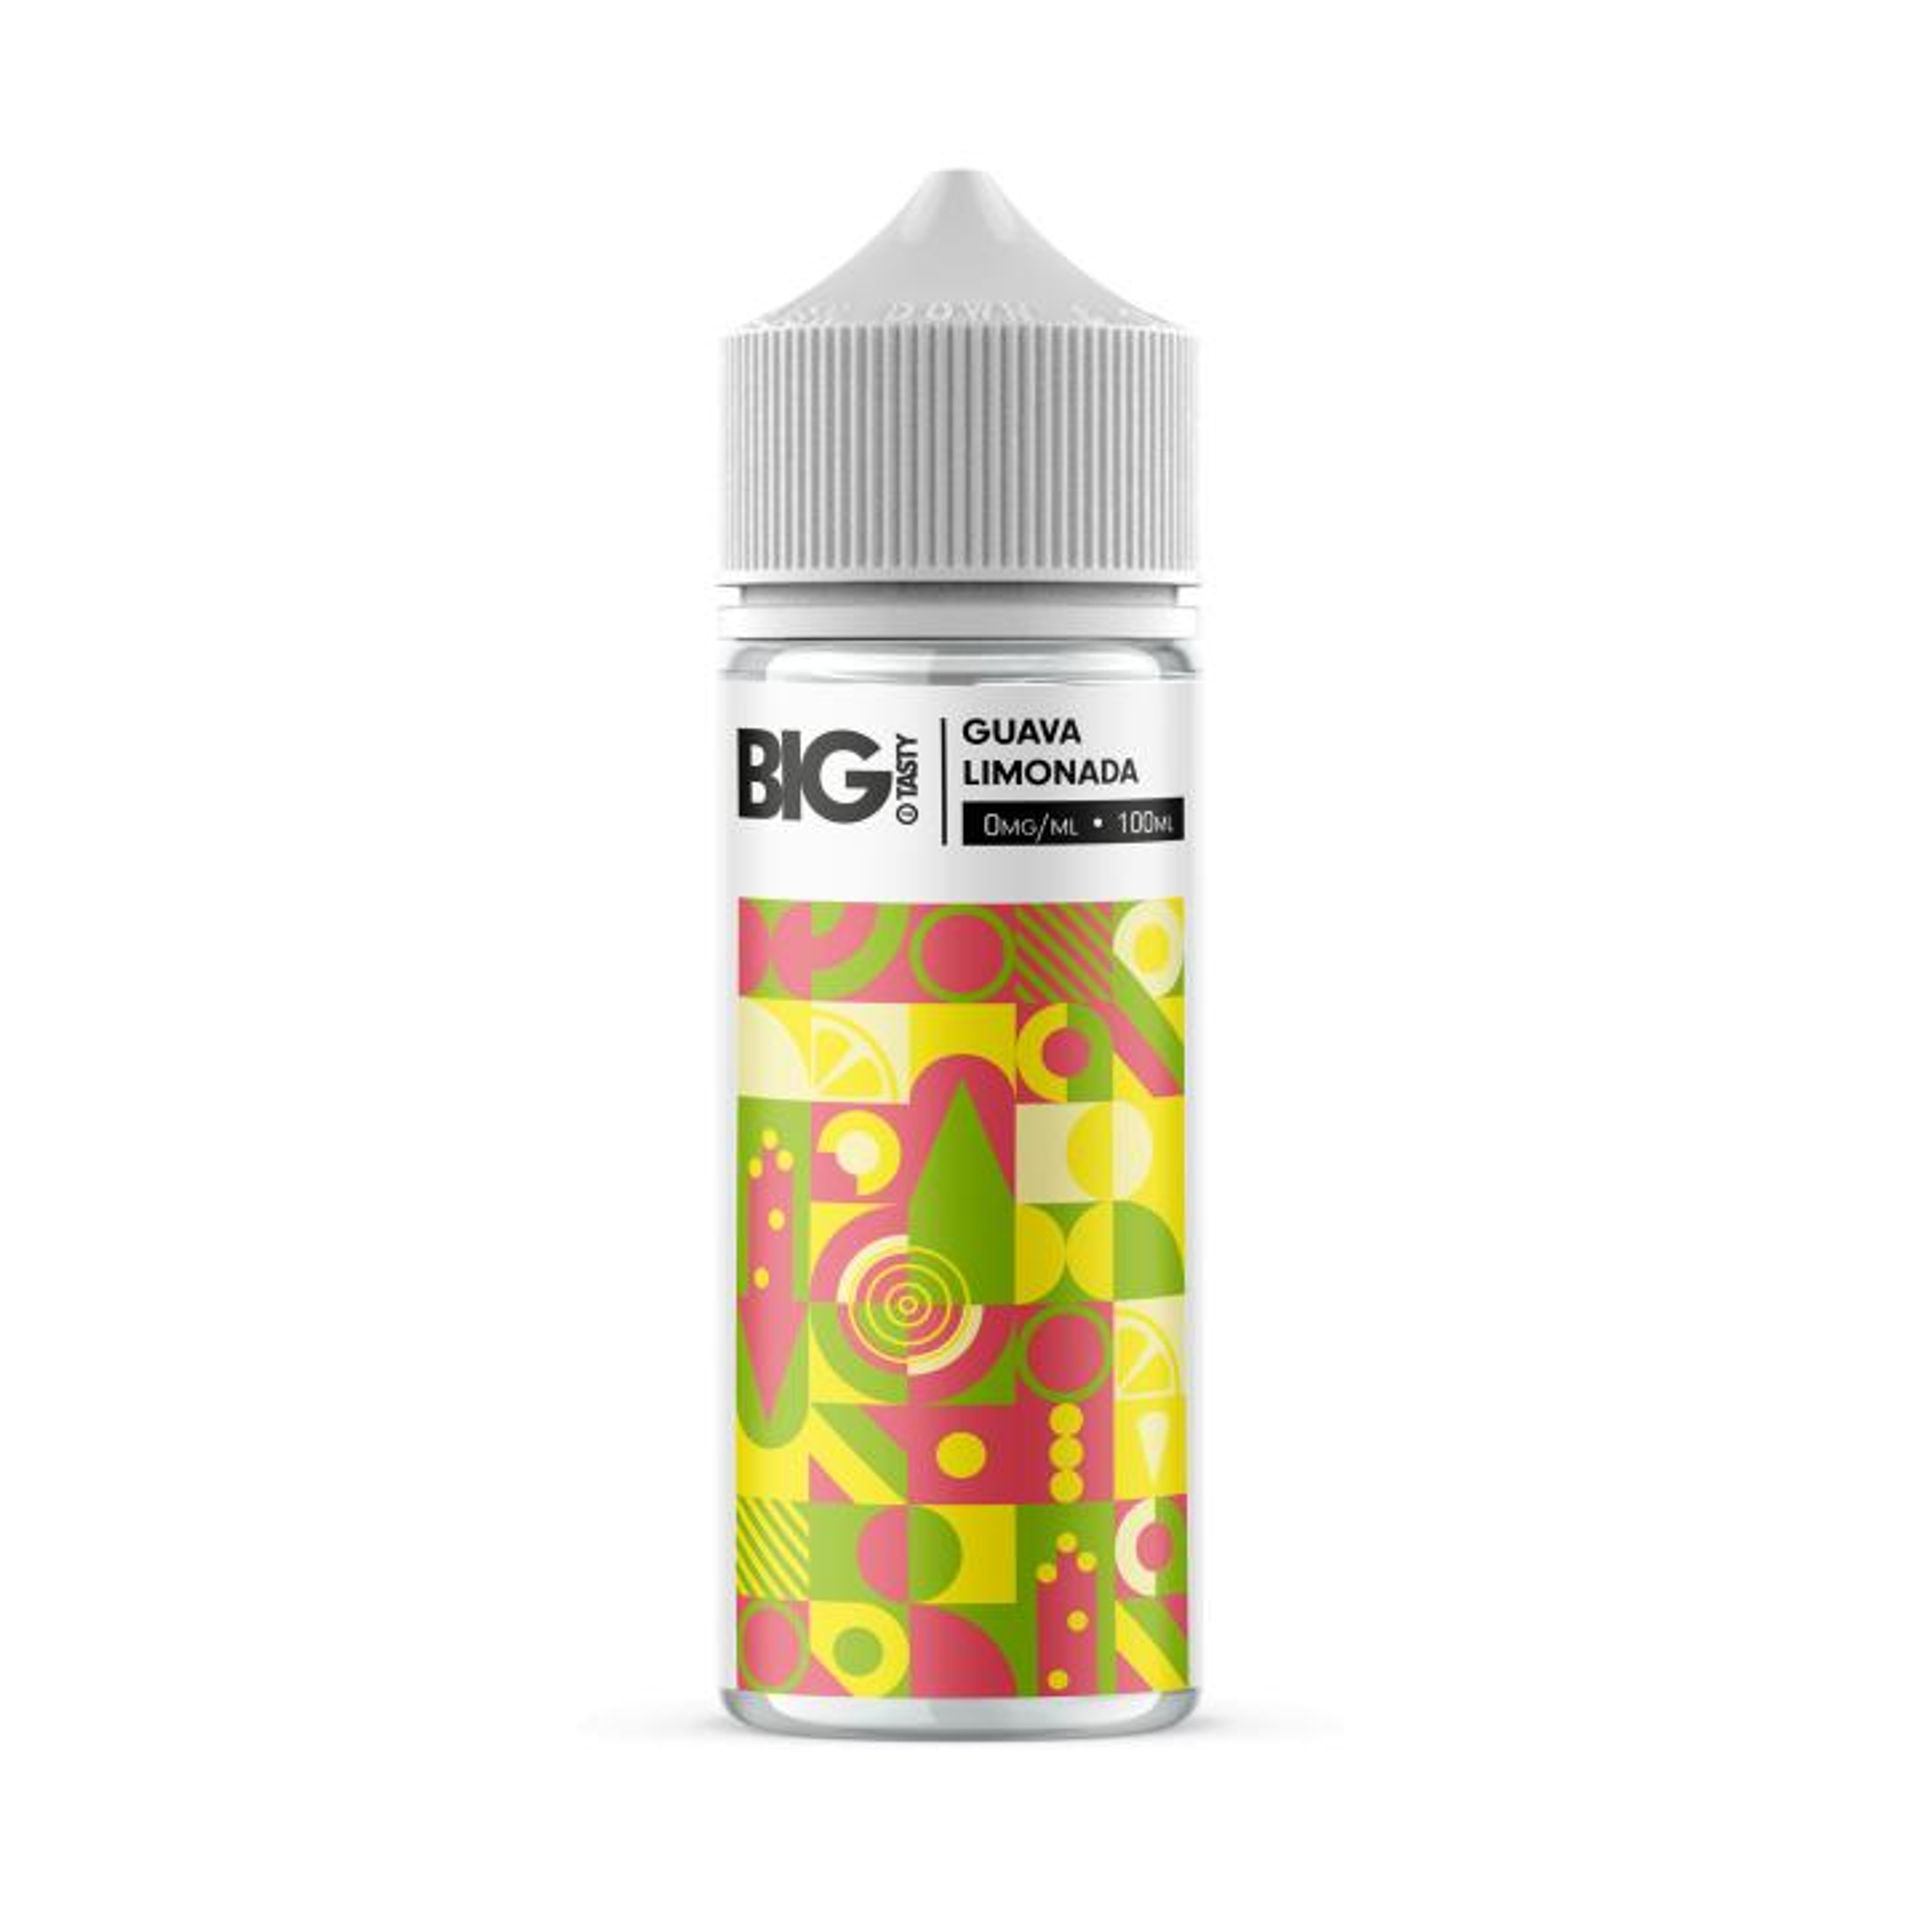 Image of Guava Limonada by Big Tasty